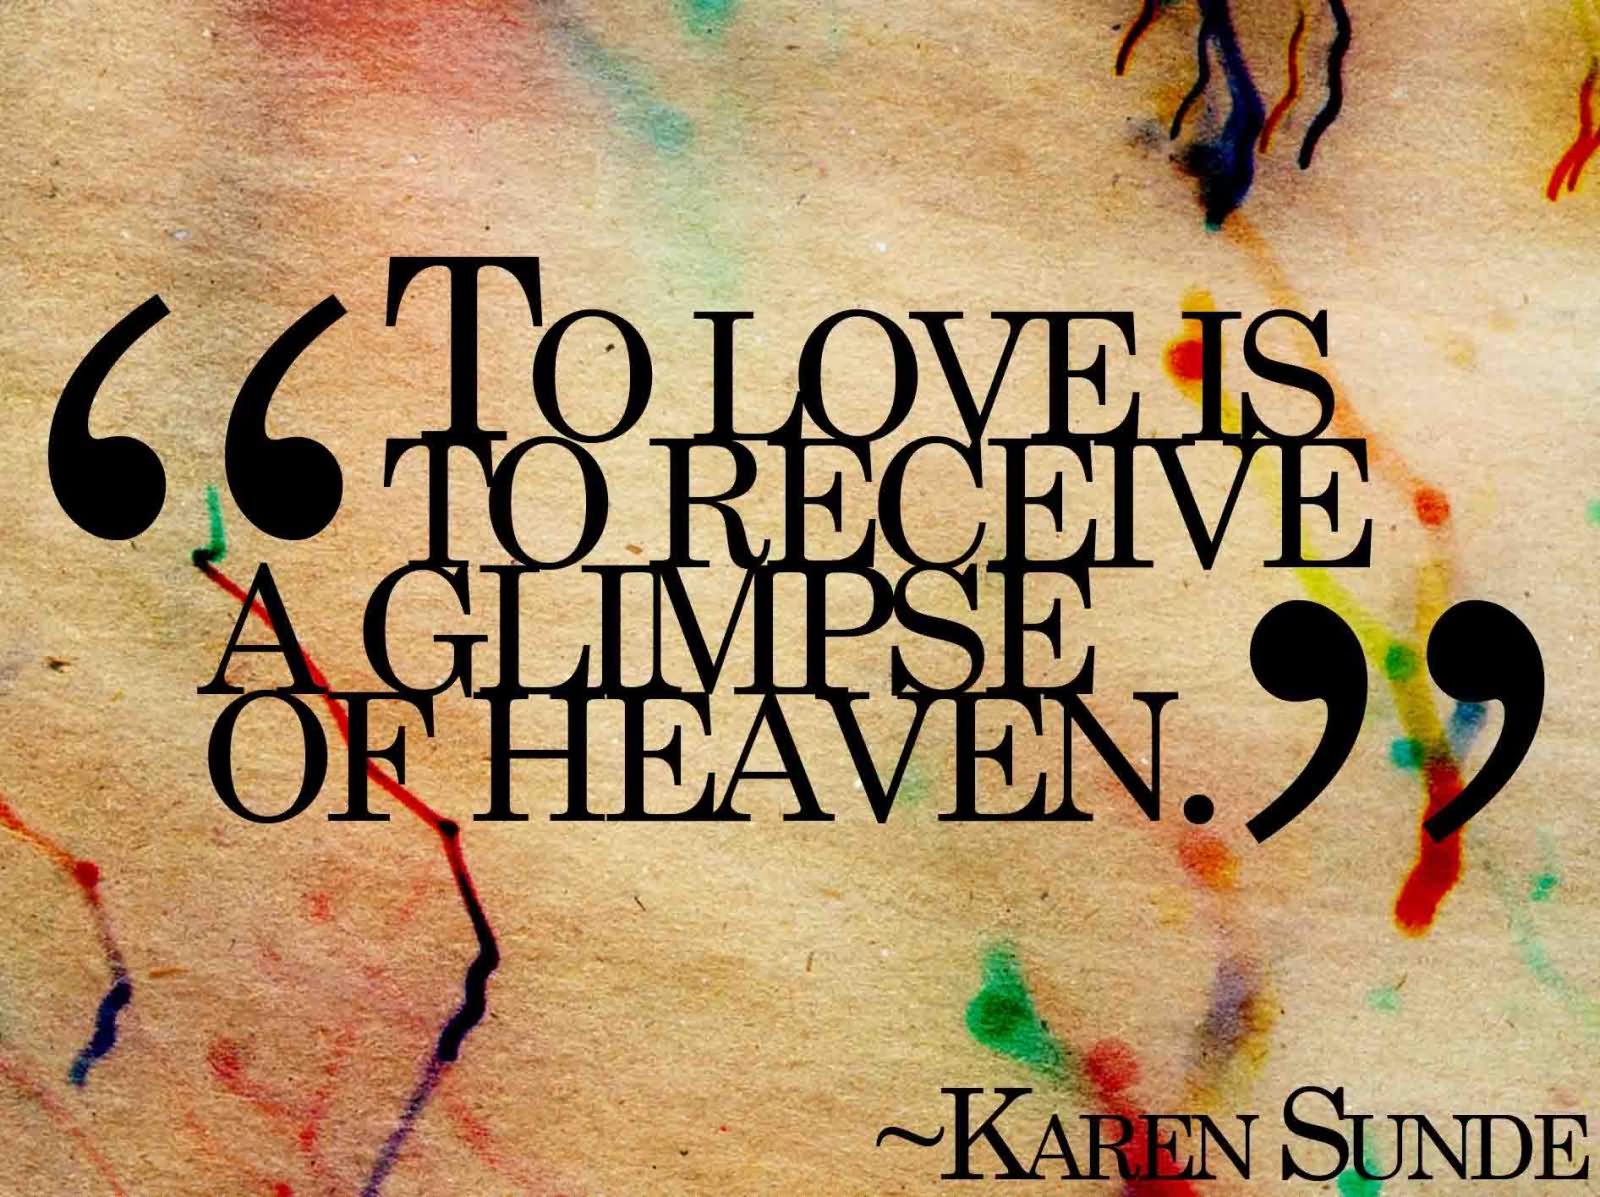 To love is to receive a glimpse of heaven. Karen Sunde